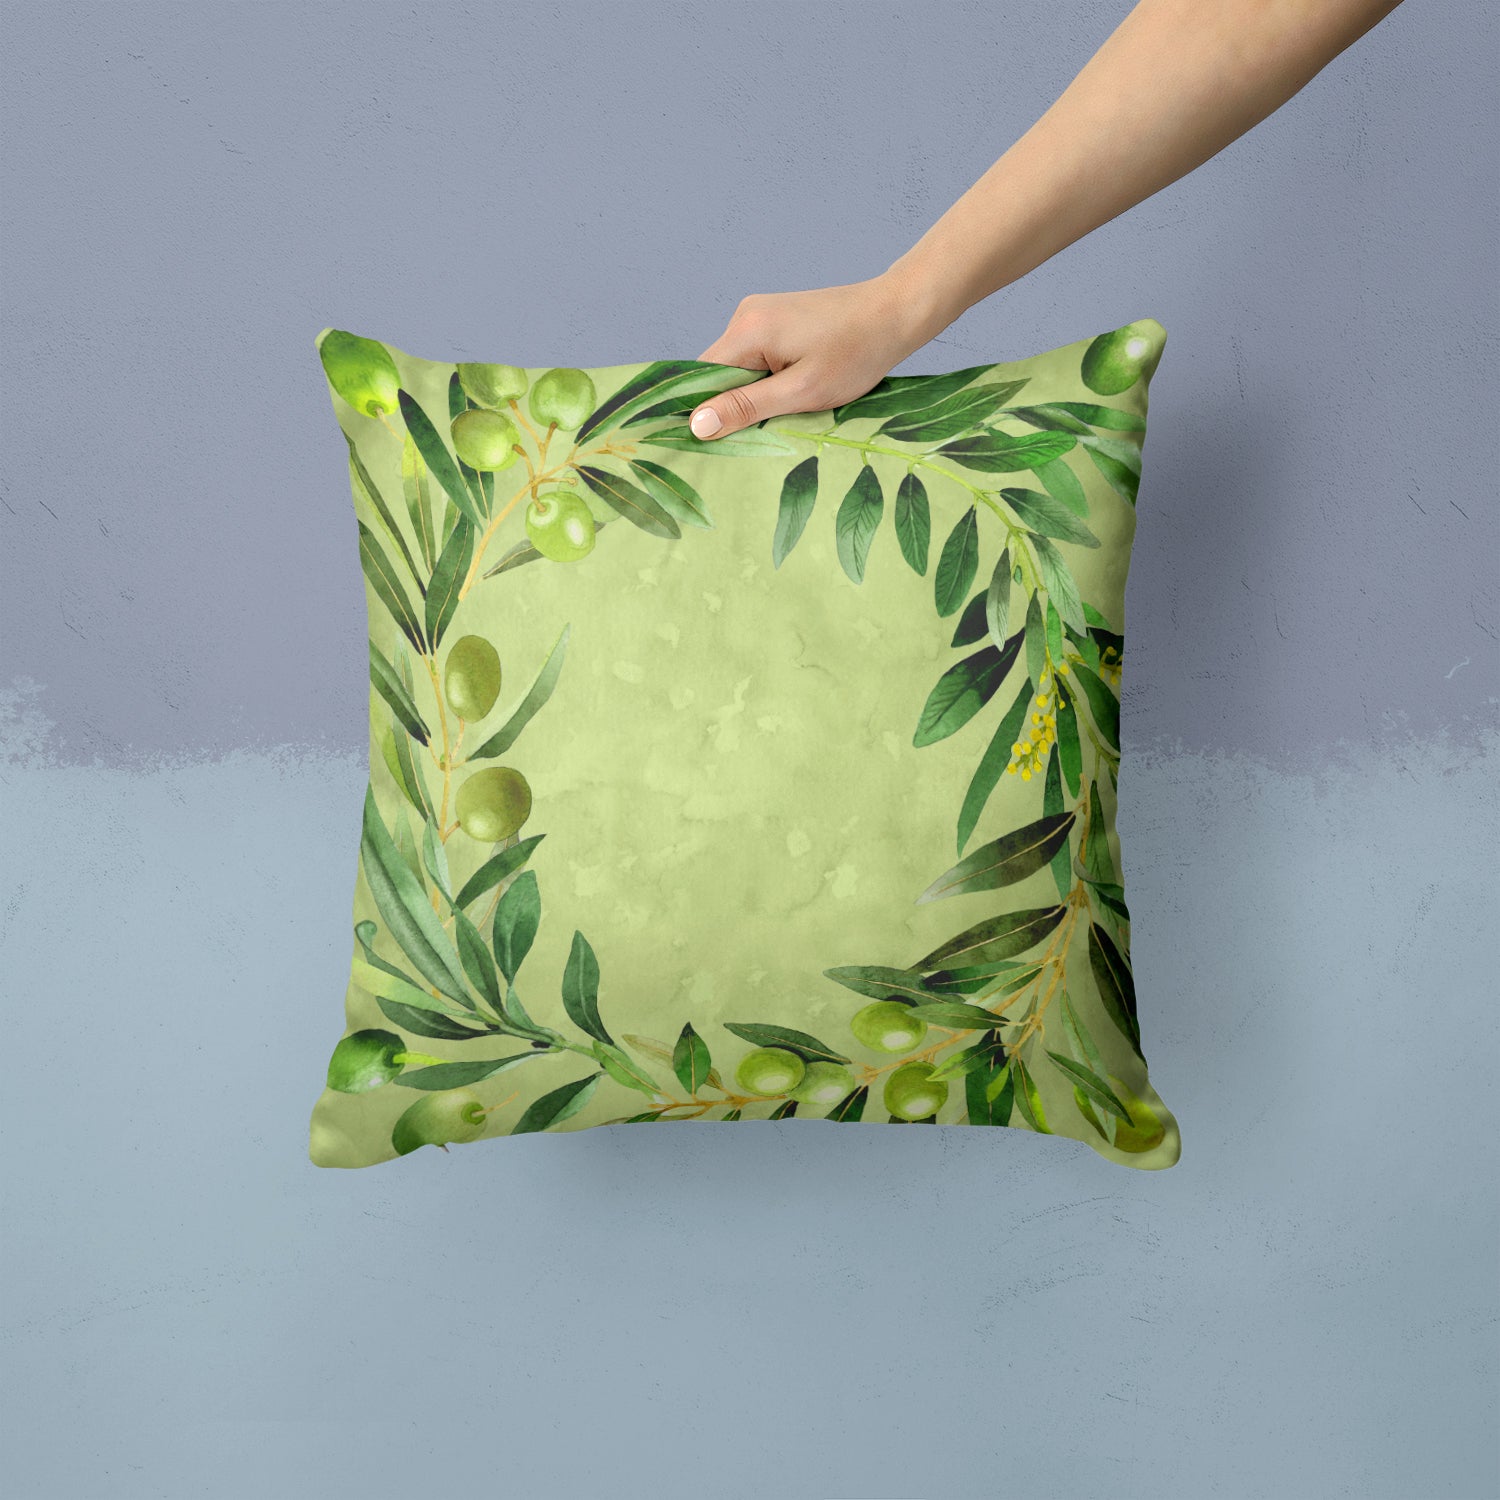 Olives Fabric Decorative Pillow CK1702PW1414 - the-store.com